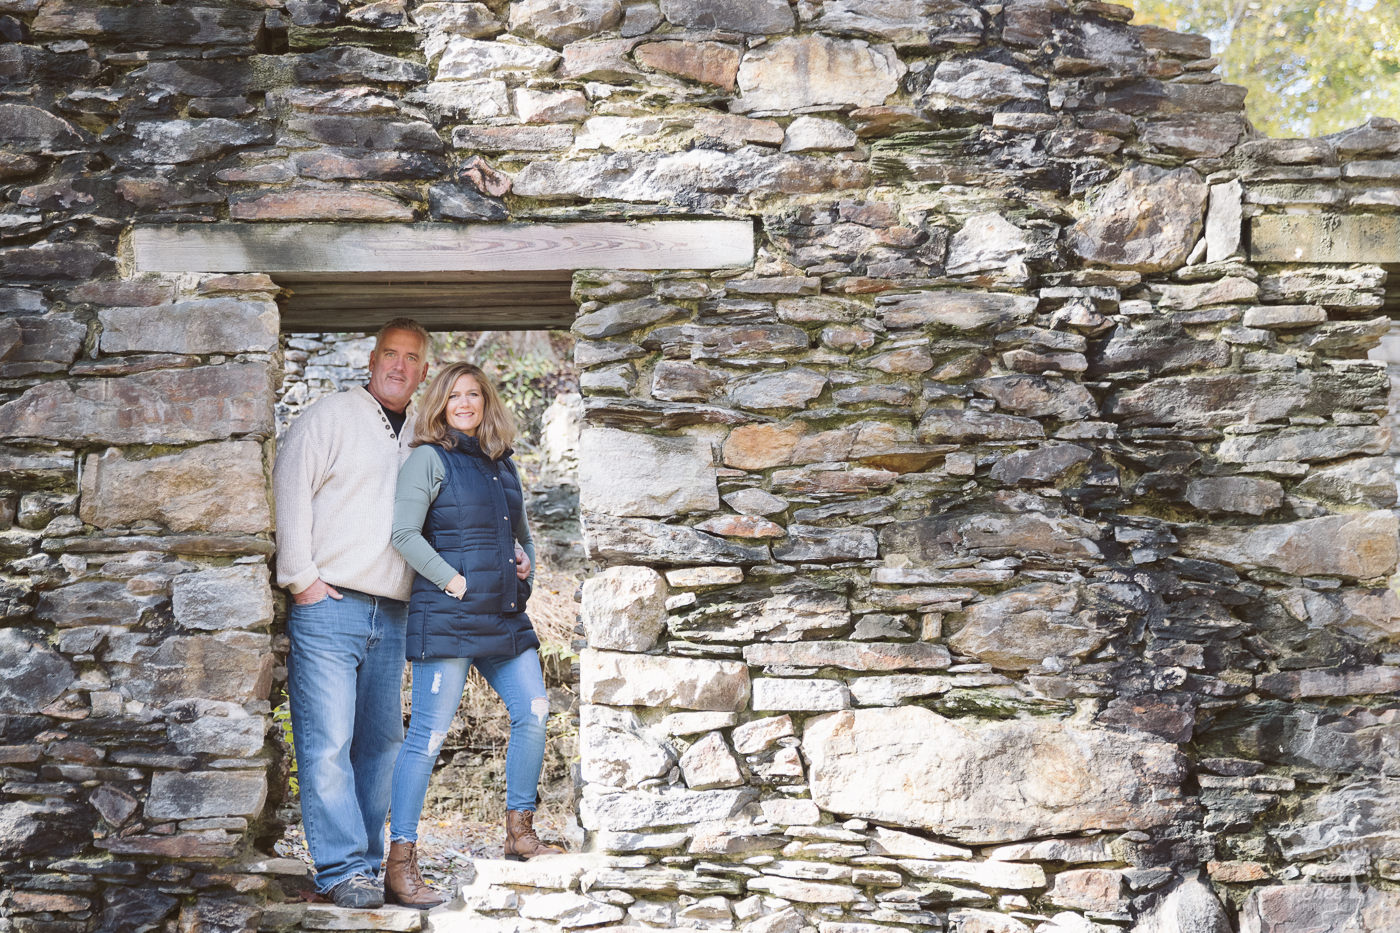 Husband and wife standing together in paper mill ruins doorway at Sope Creek.